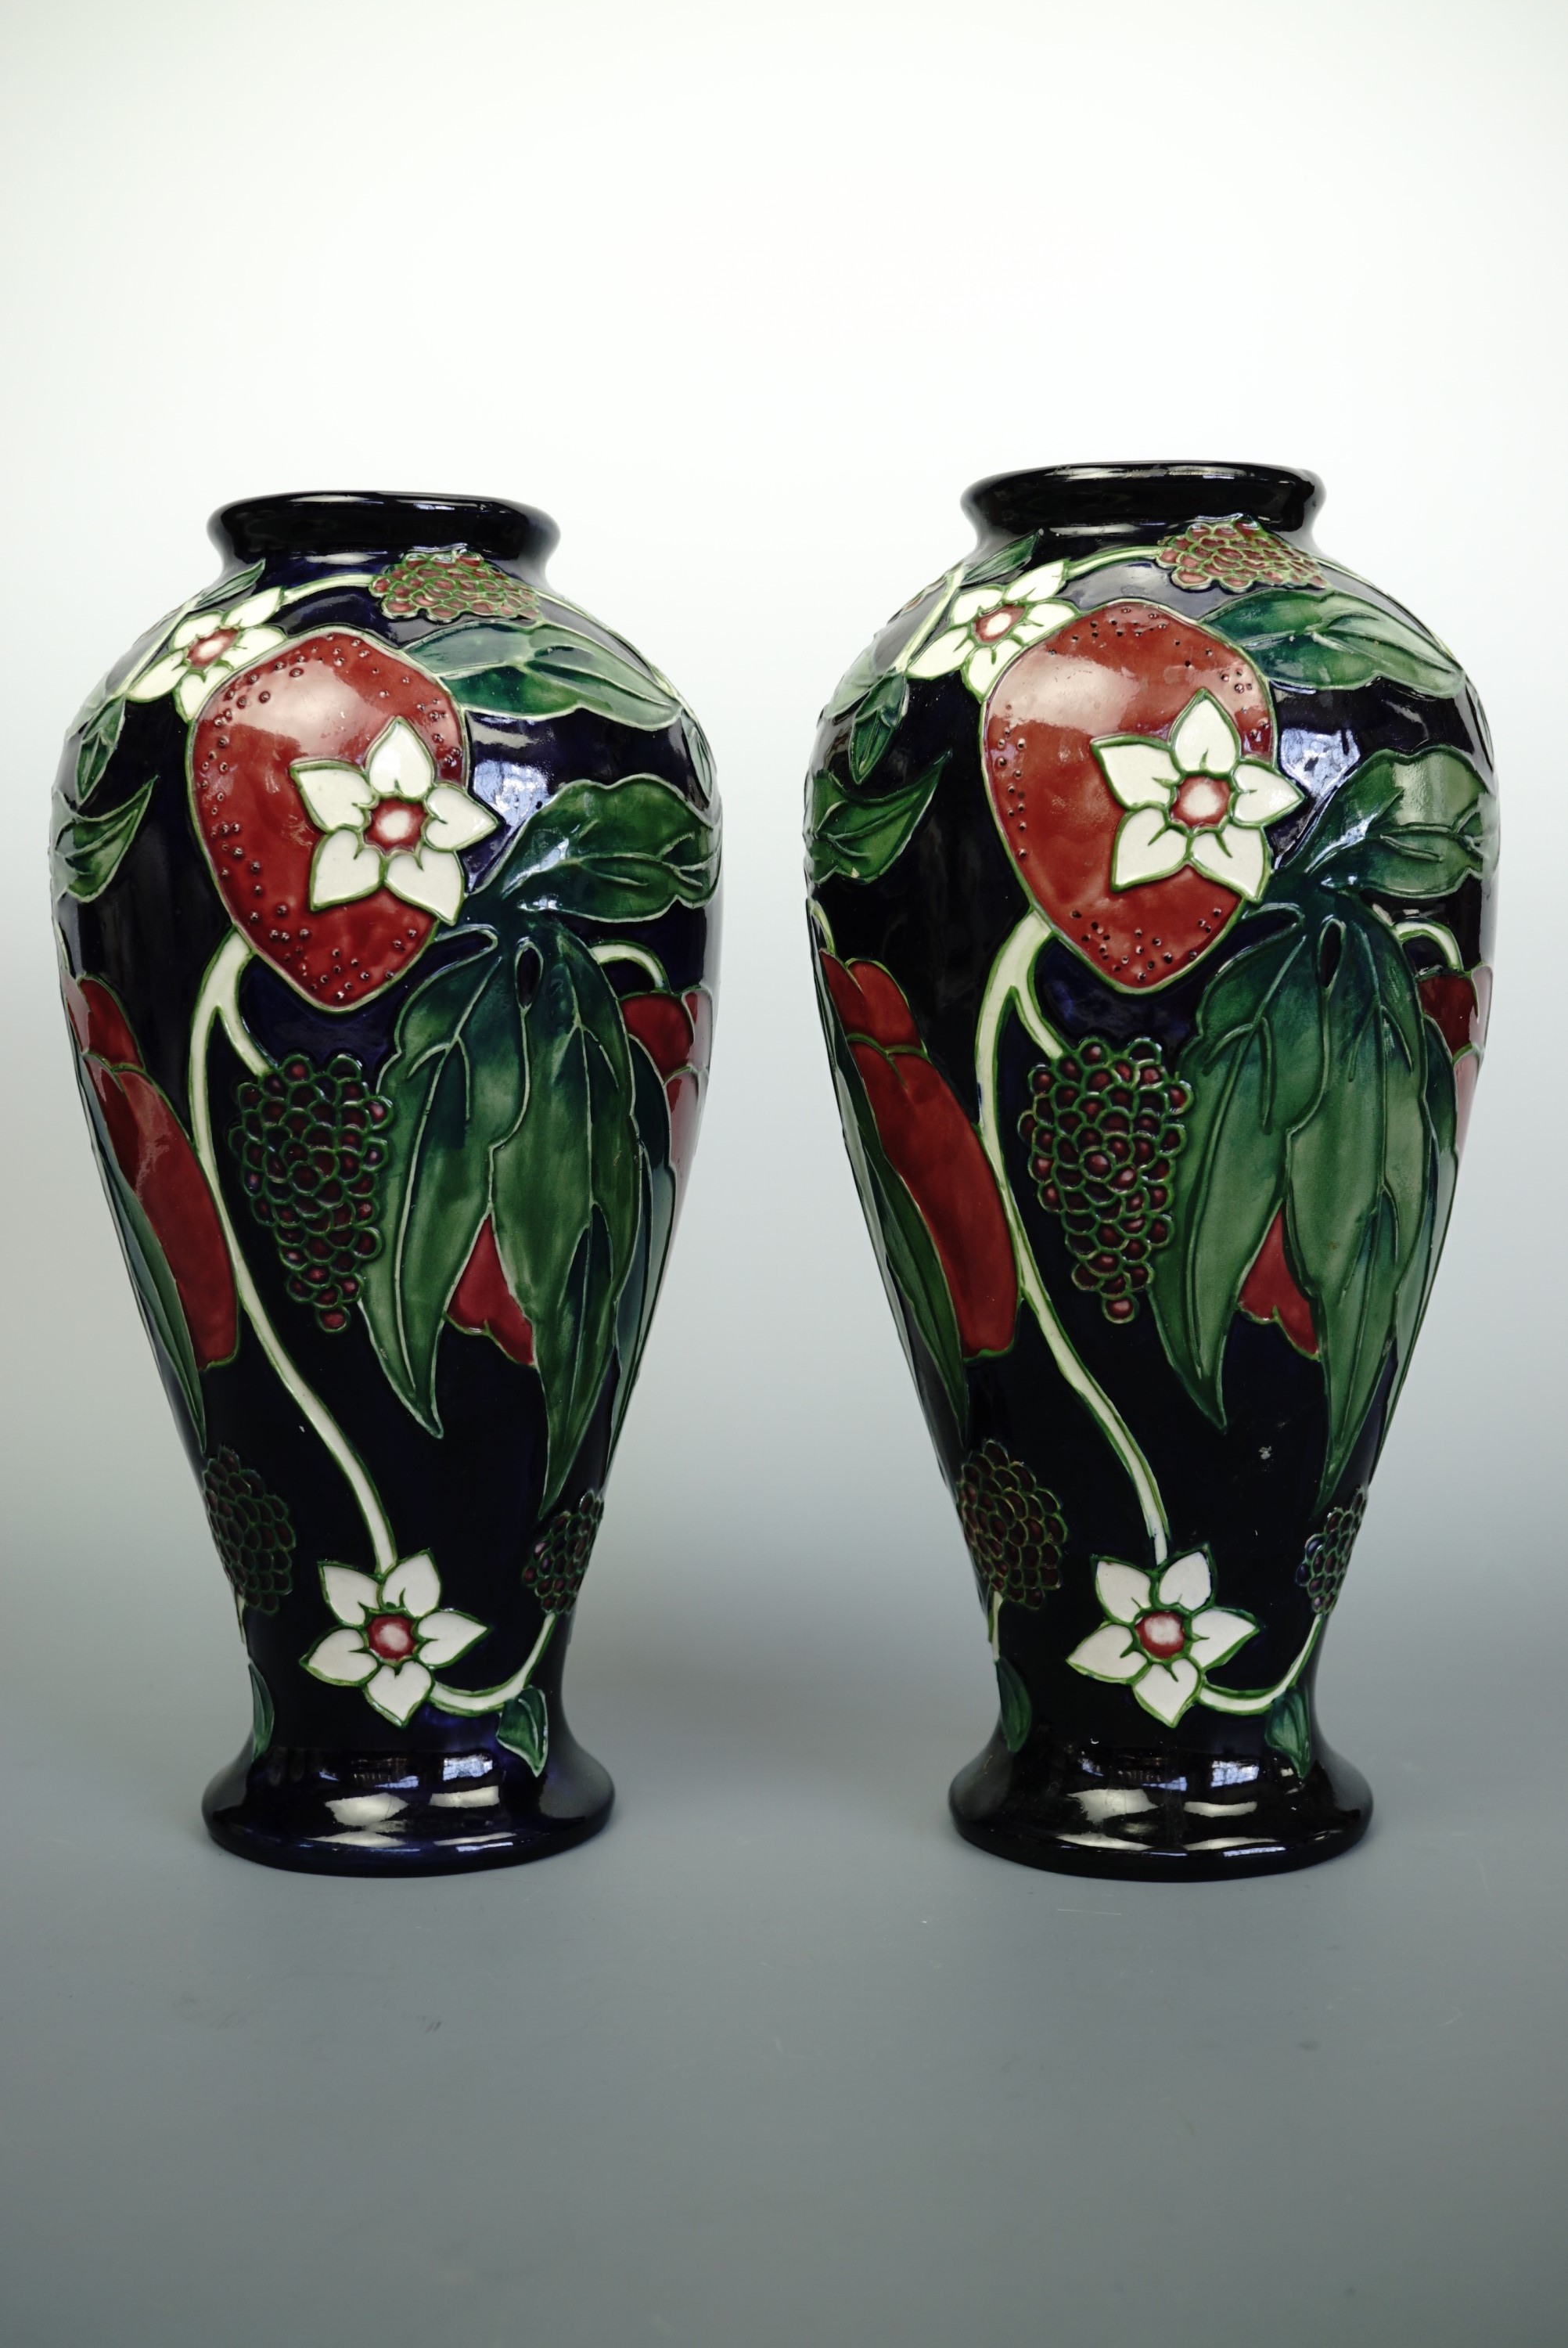 A pair of Country Craft vases by Anne Rowe, 29 cm high (free of damage)